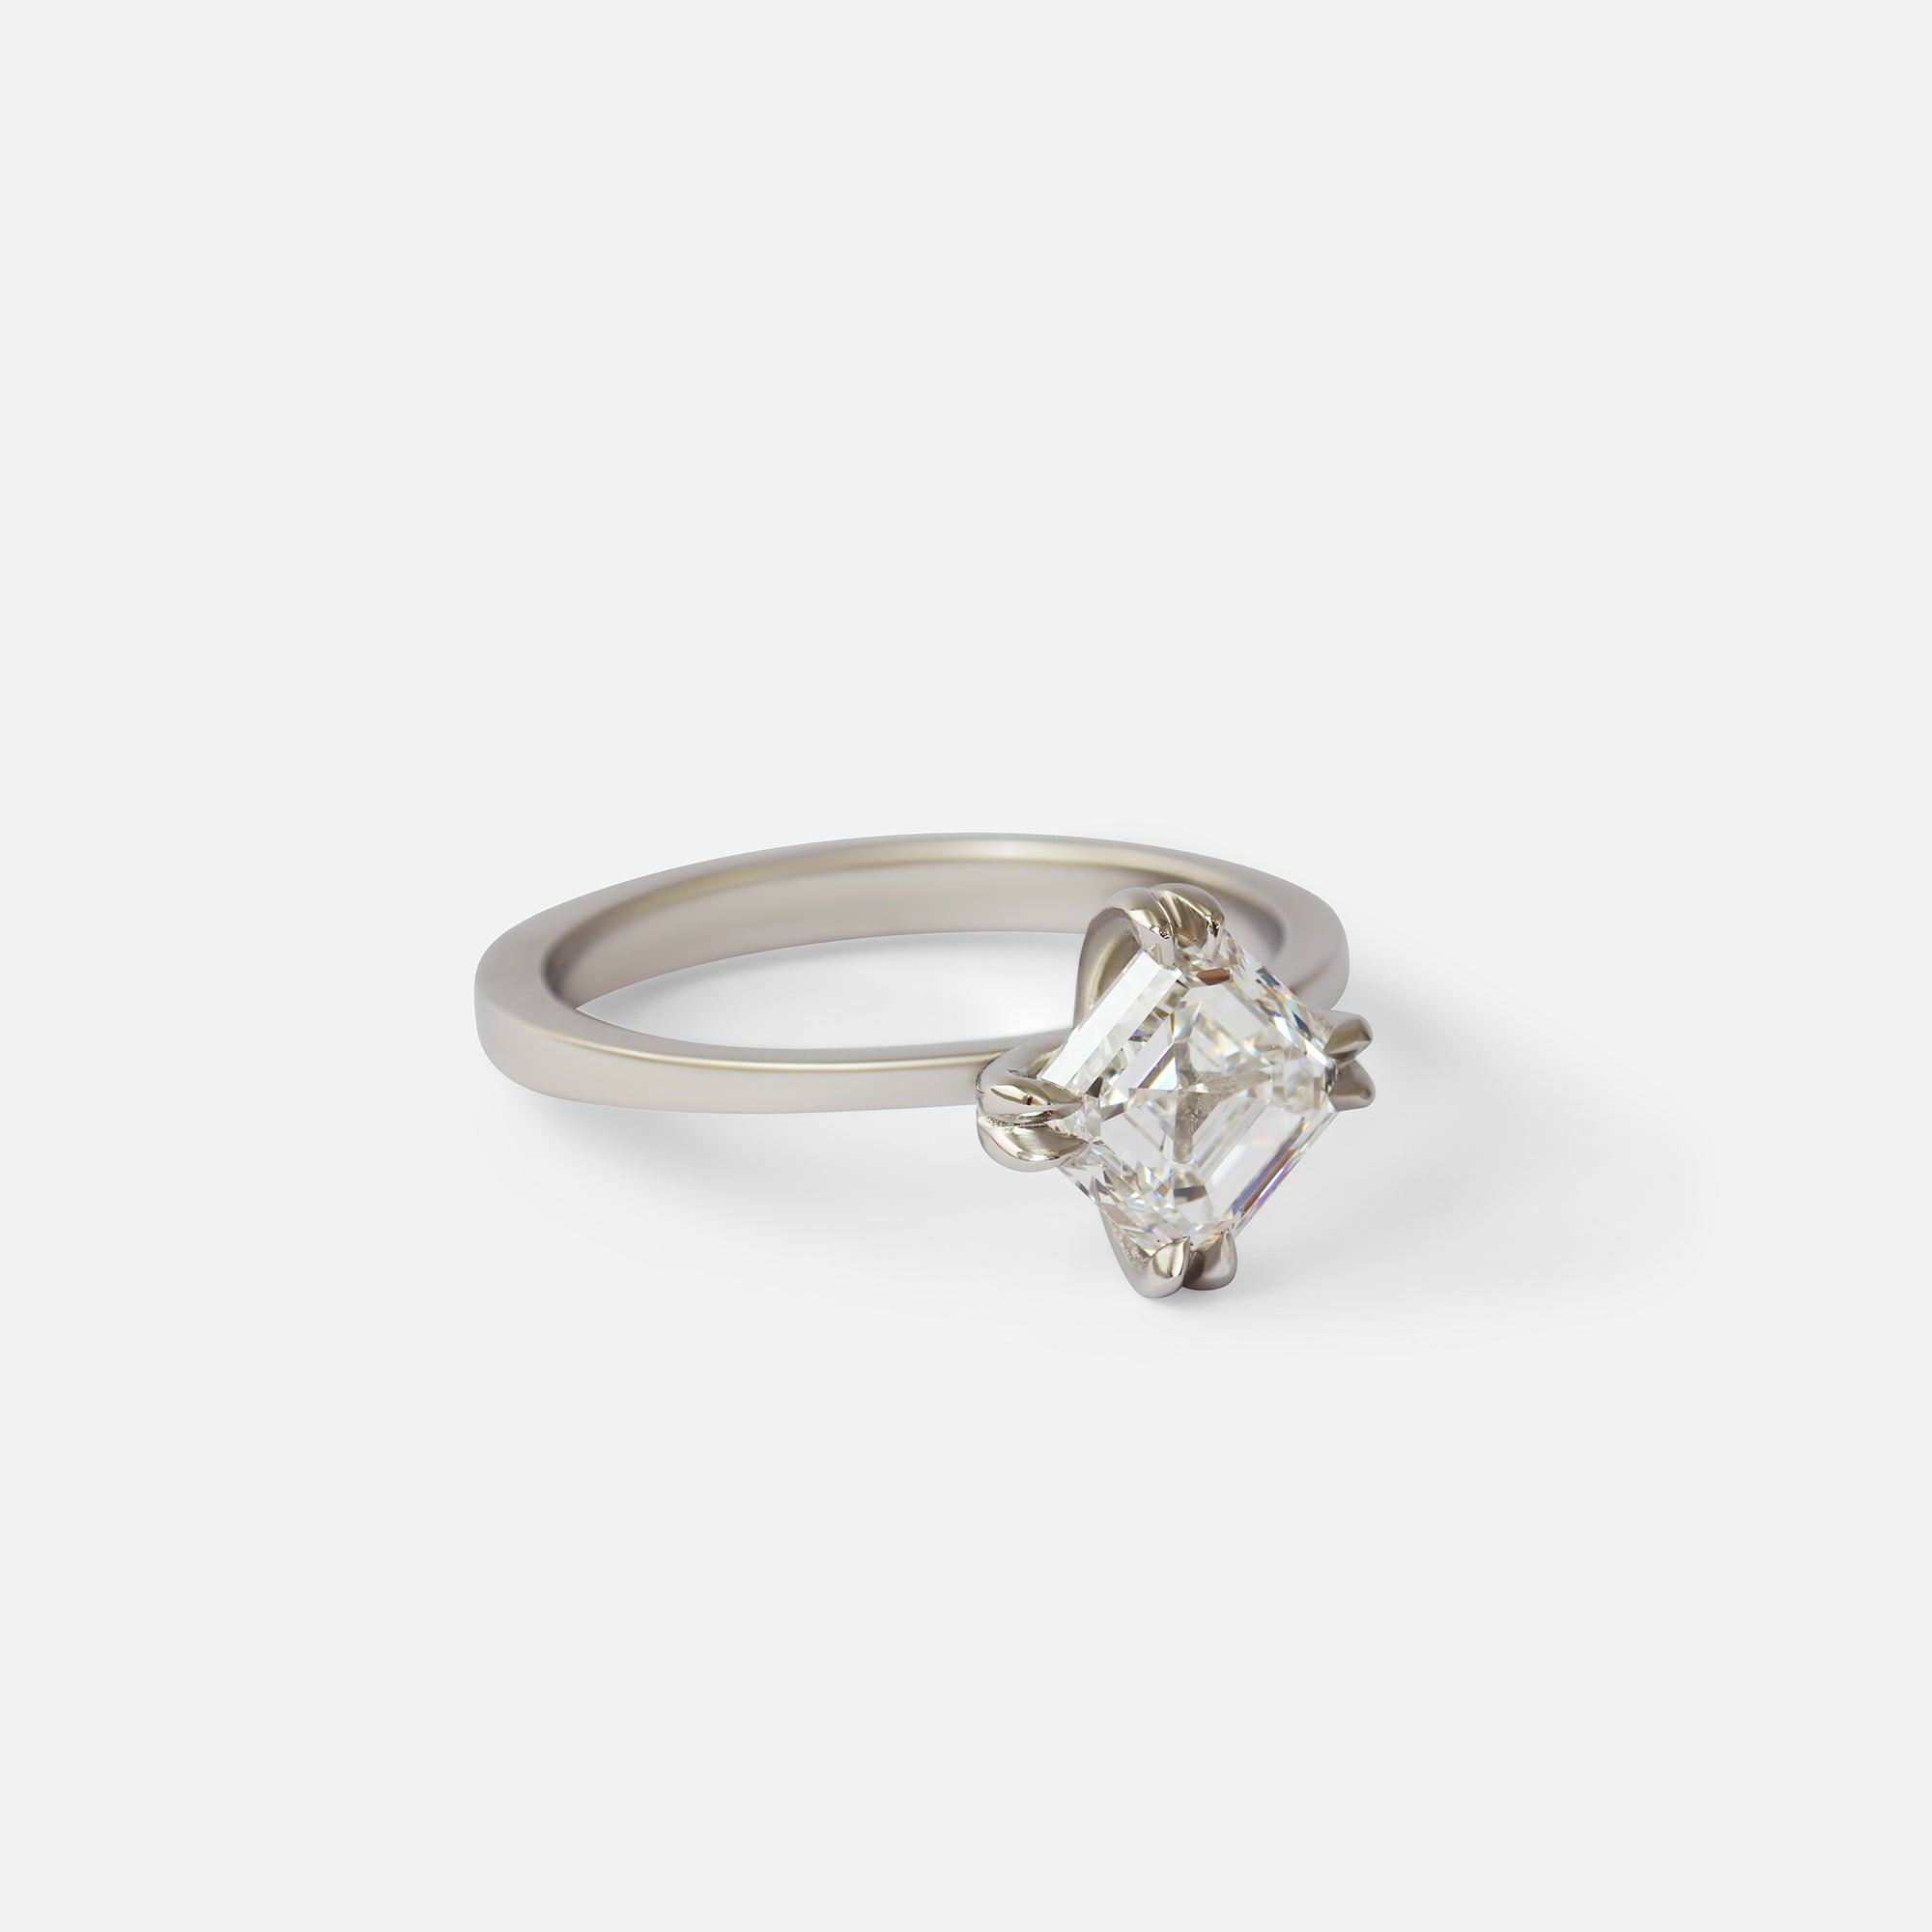 Ash / Asscher Cut Diamond Ring By fitzgerald jewelry in ENGAGEMENT Category